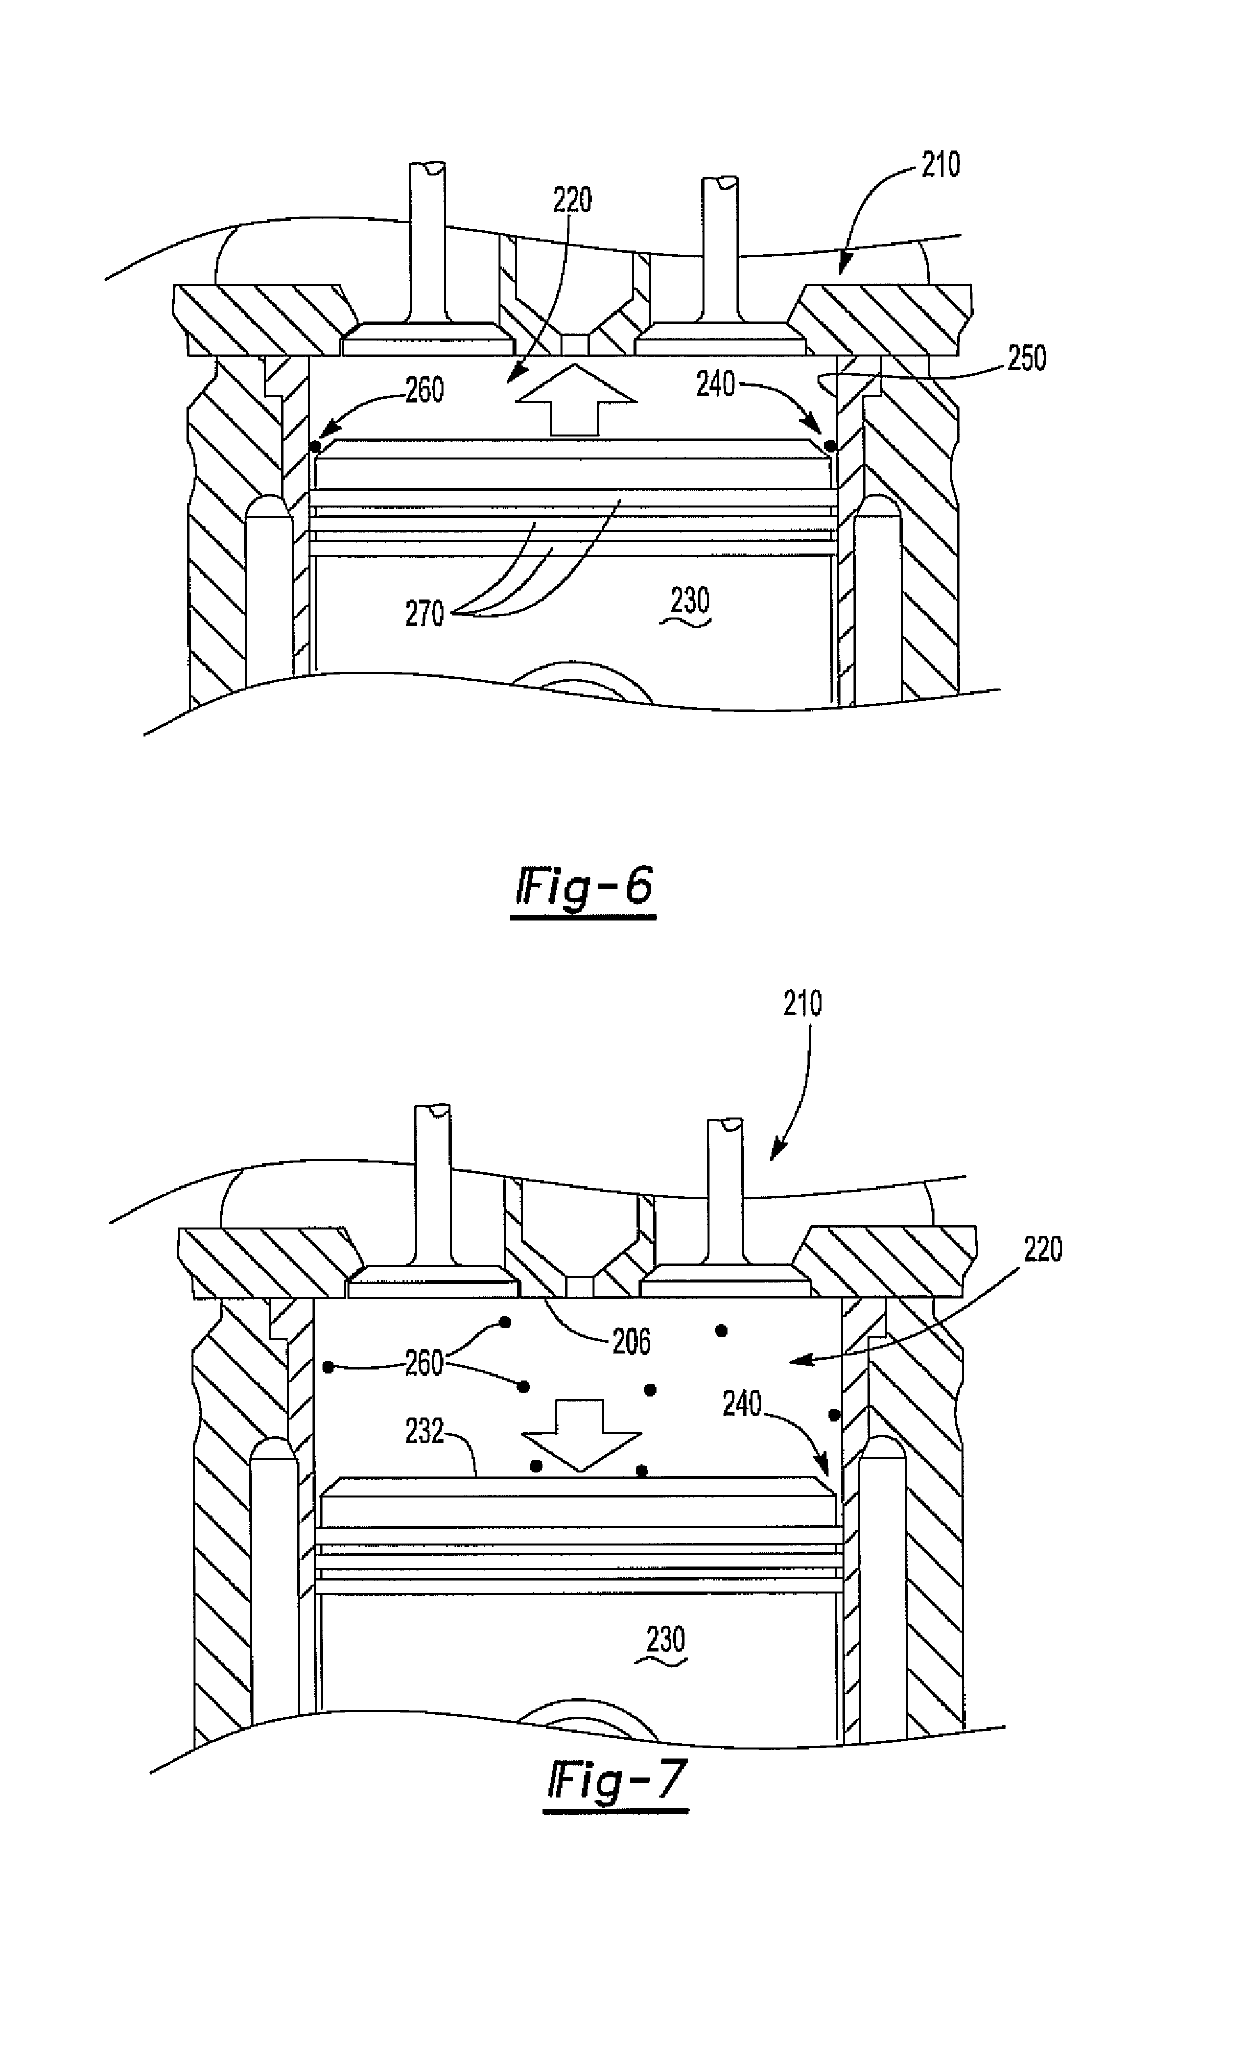 Process for reducing abnormal combustion within an internal combustion engine